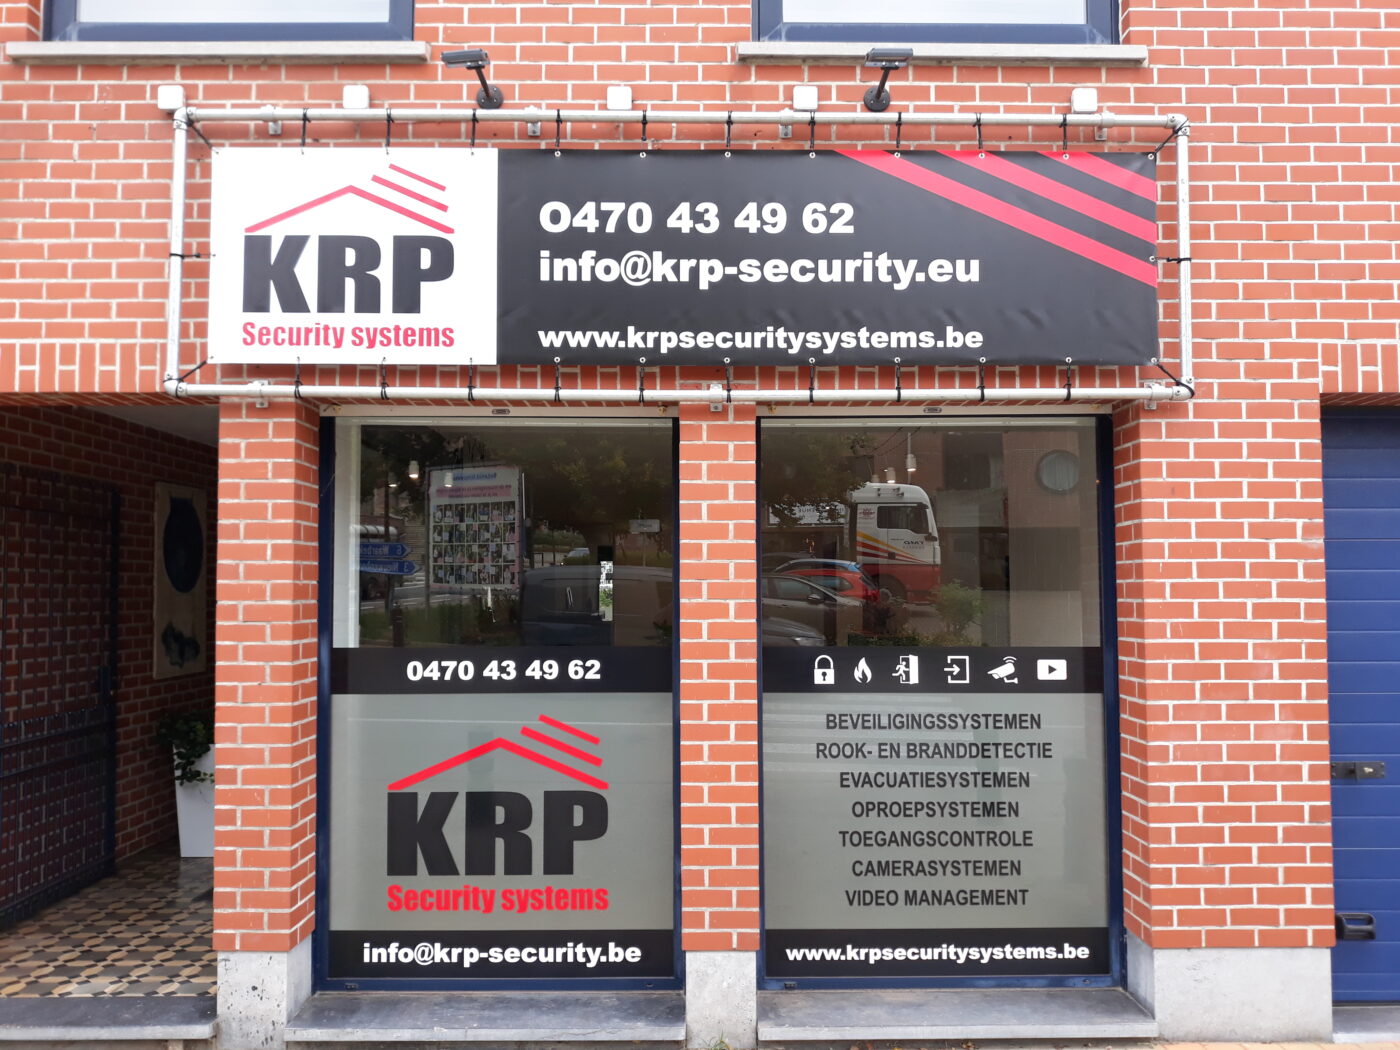 KRP security systems